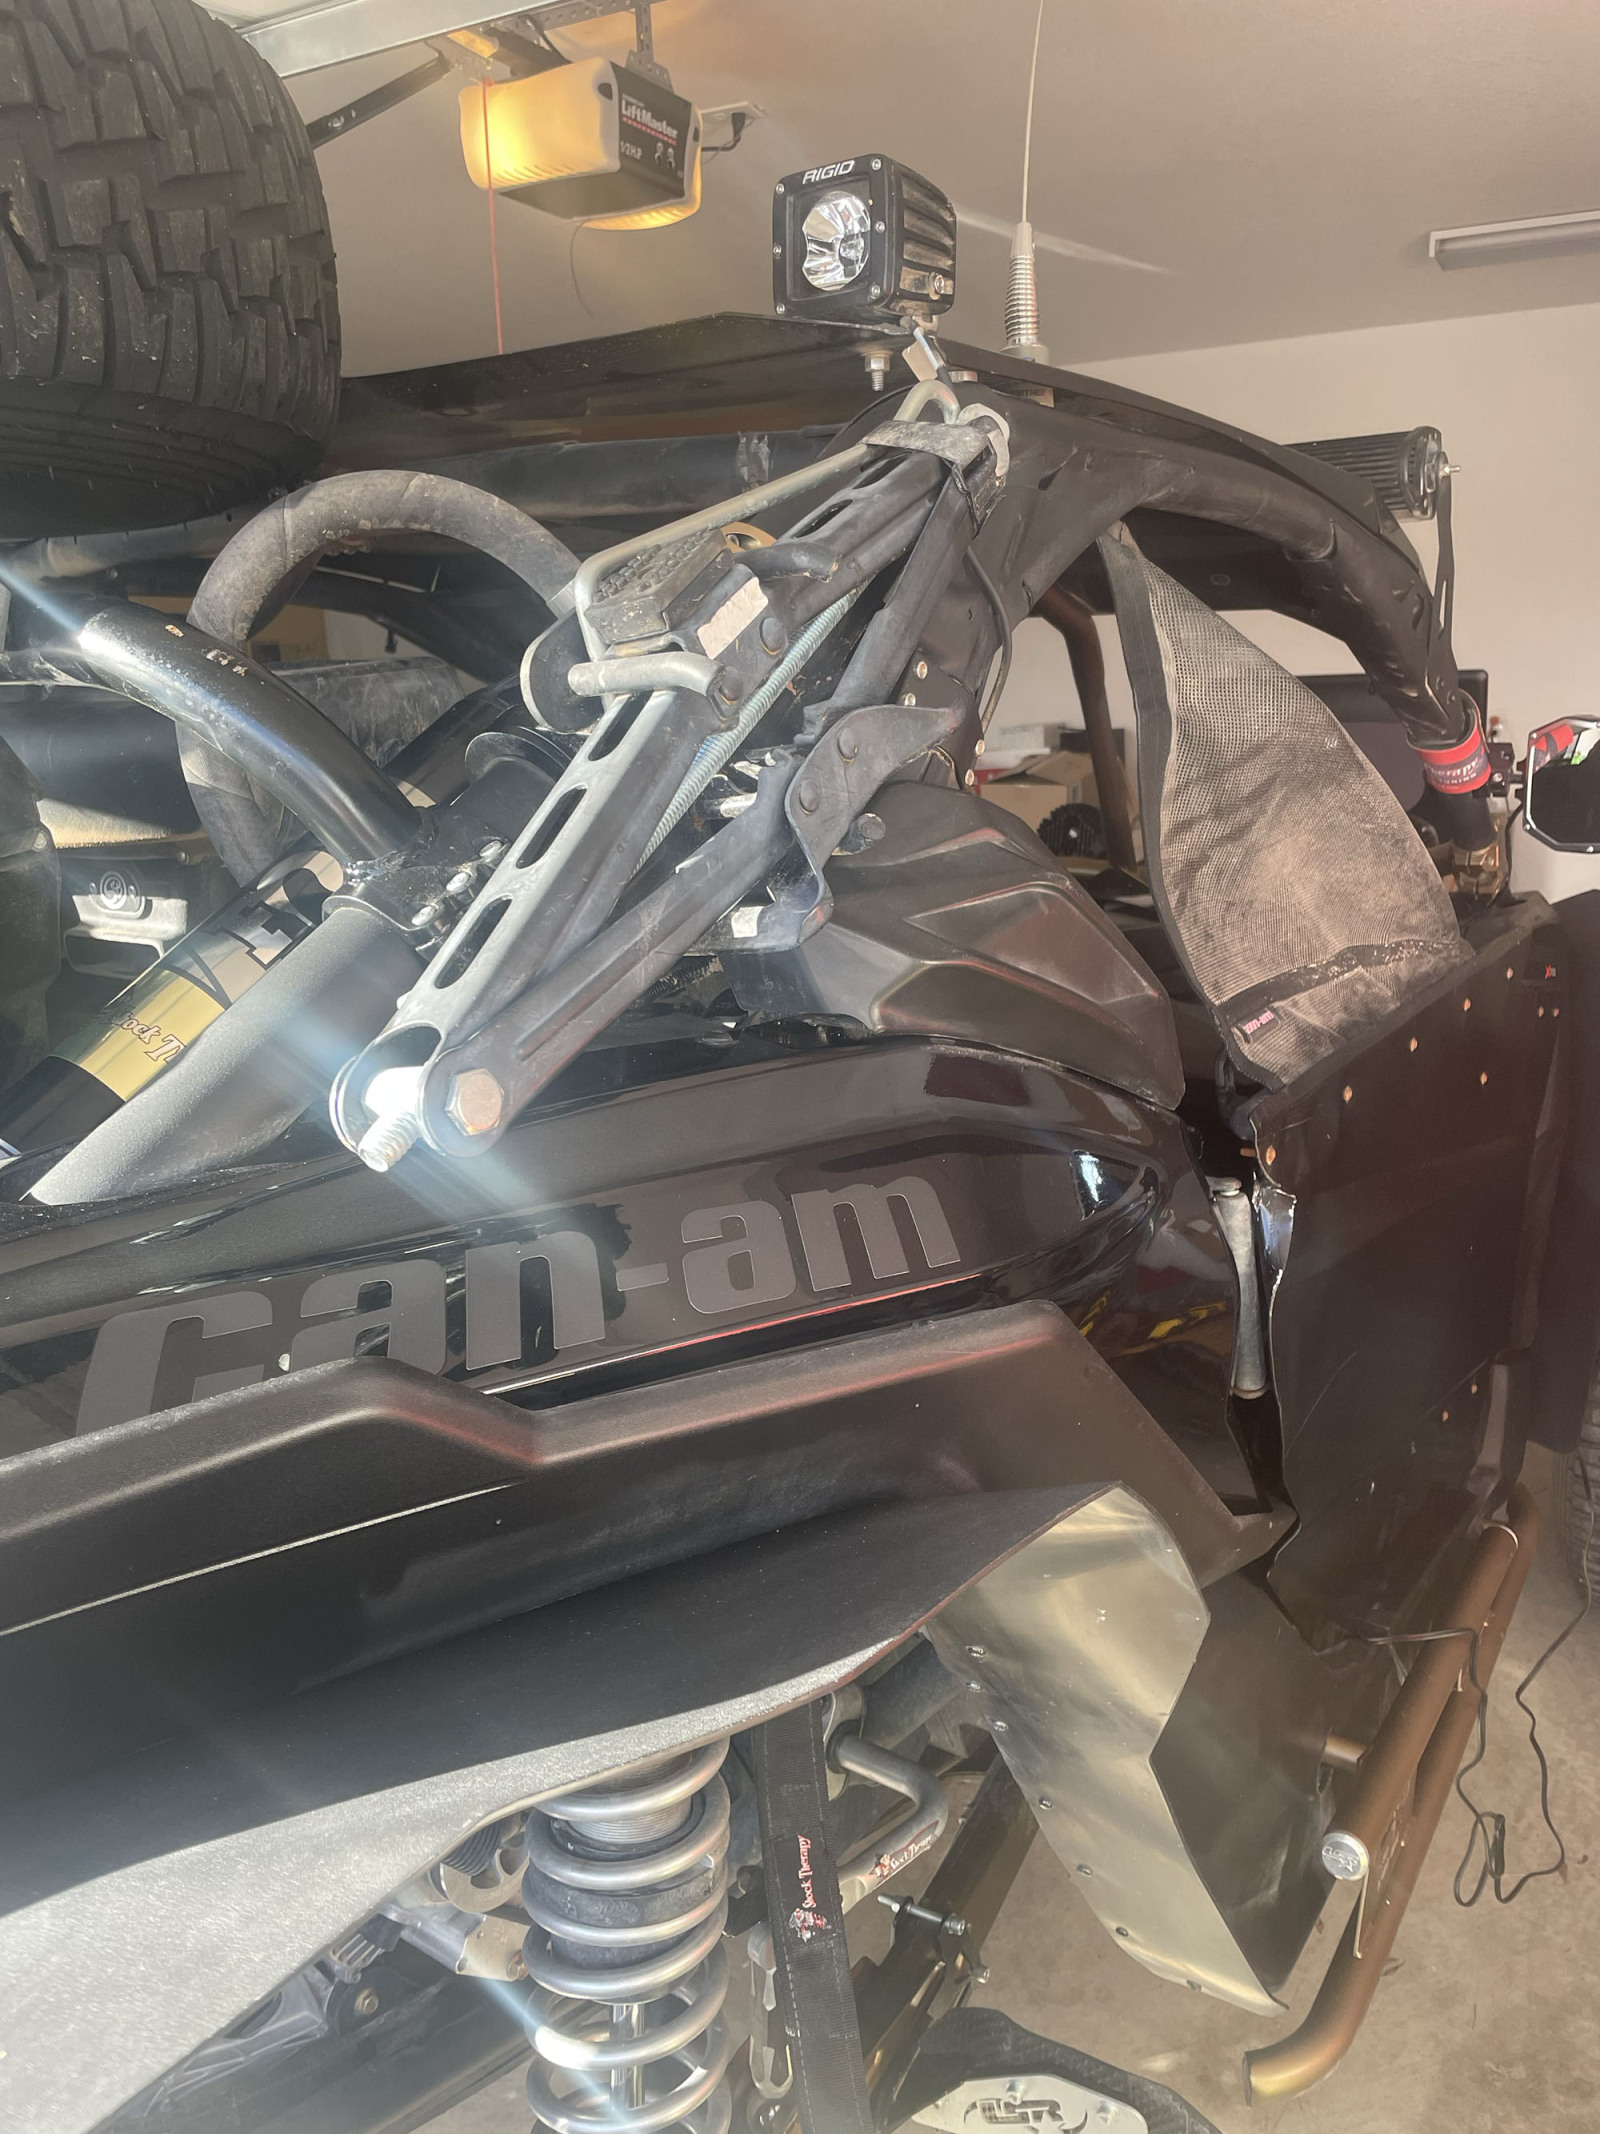 For Sale: 2019 can am maverick x3 turbo R with over 40k in upgrades - photo4